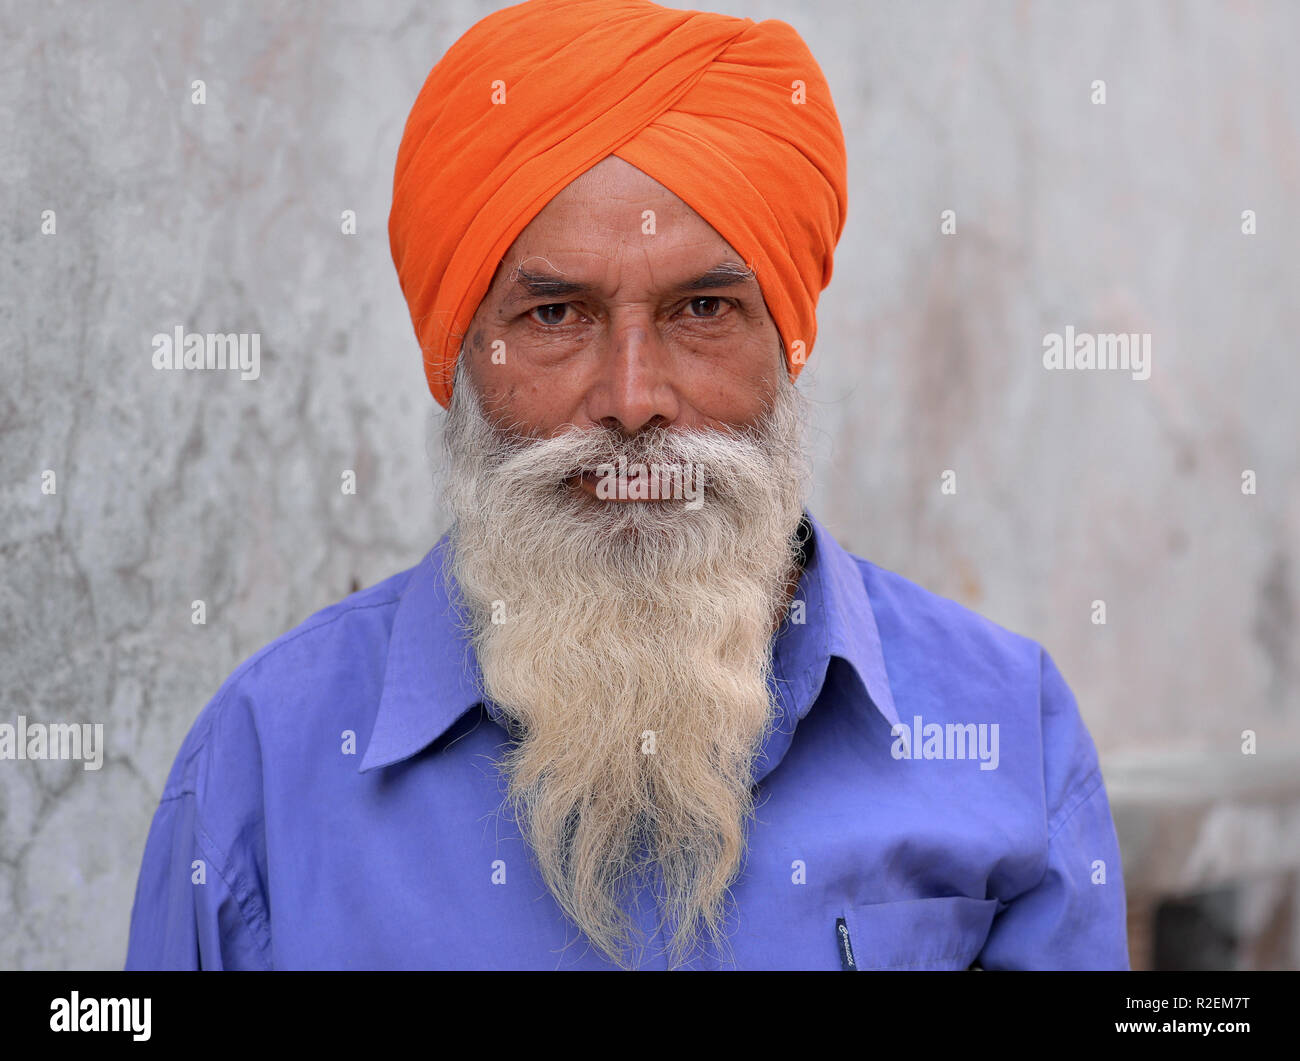 Middle-aged Indian Sikh man with orange traditional turban (dastar) poses for the camera. Stock Photo